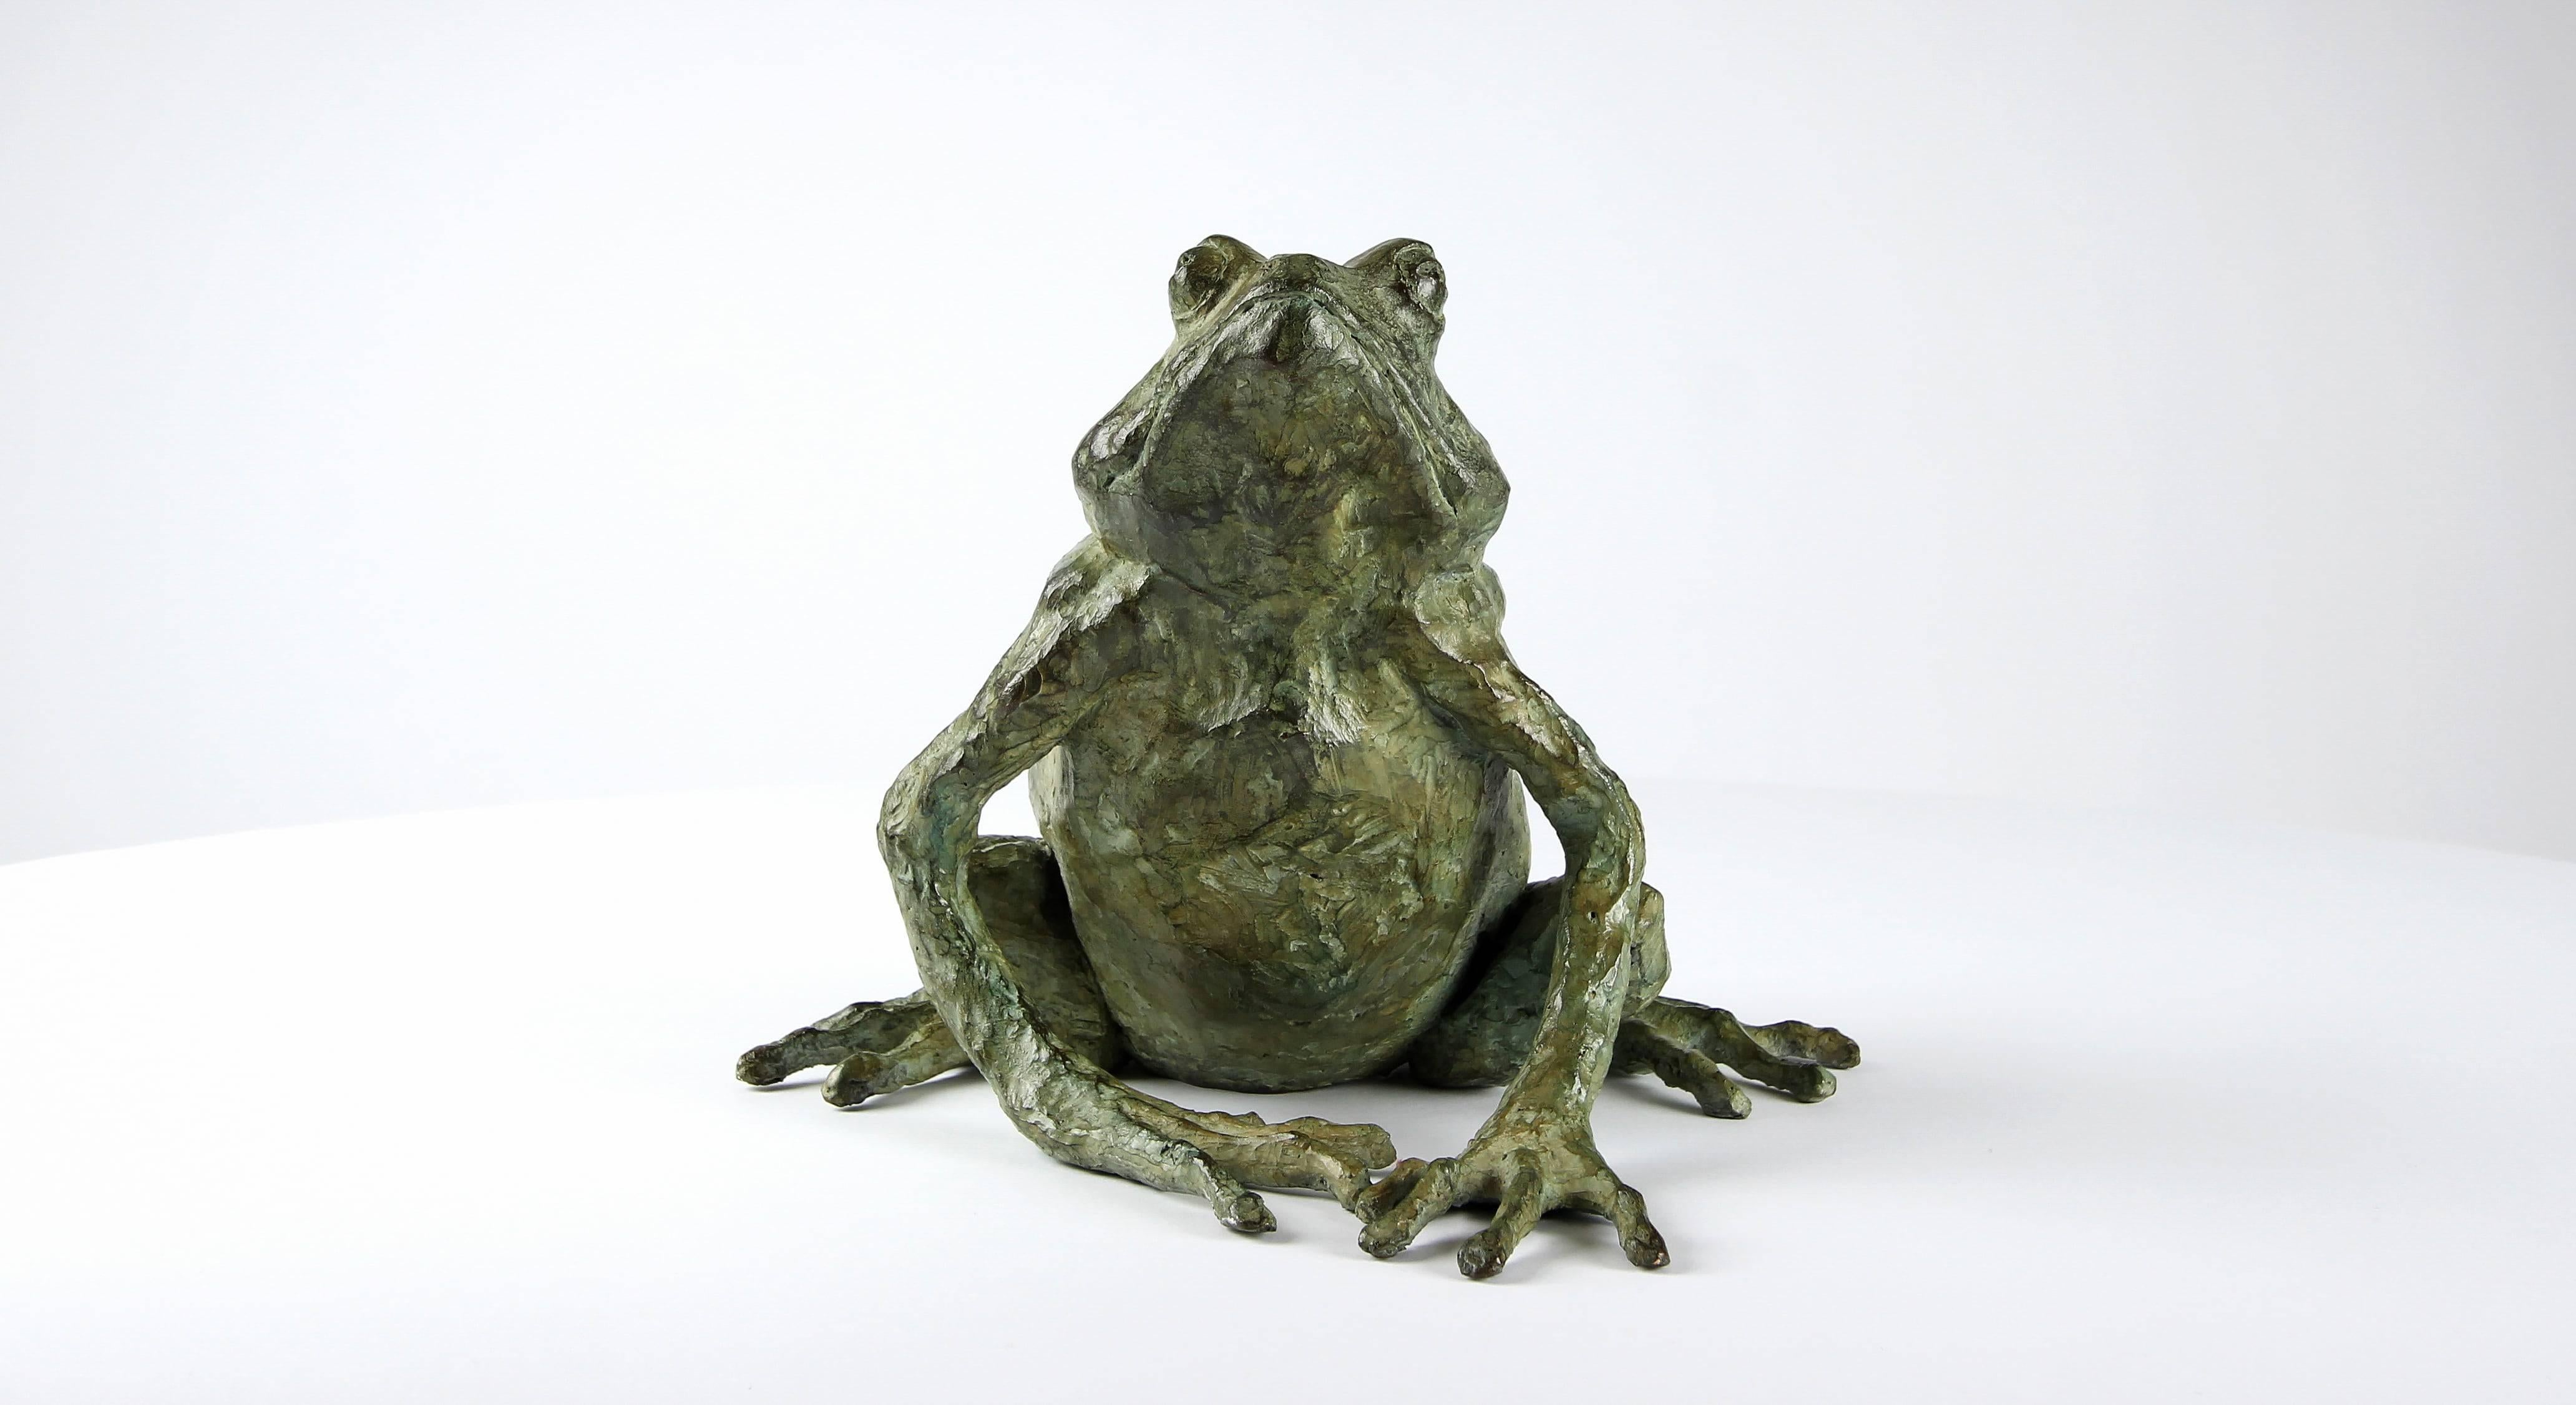 Magic Frog by Chésade - Bronze sculpture, animal art, expressionism, realism For Sale 4